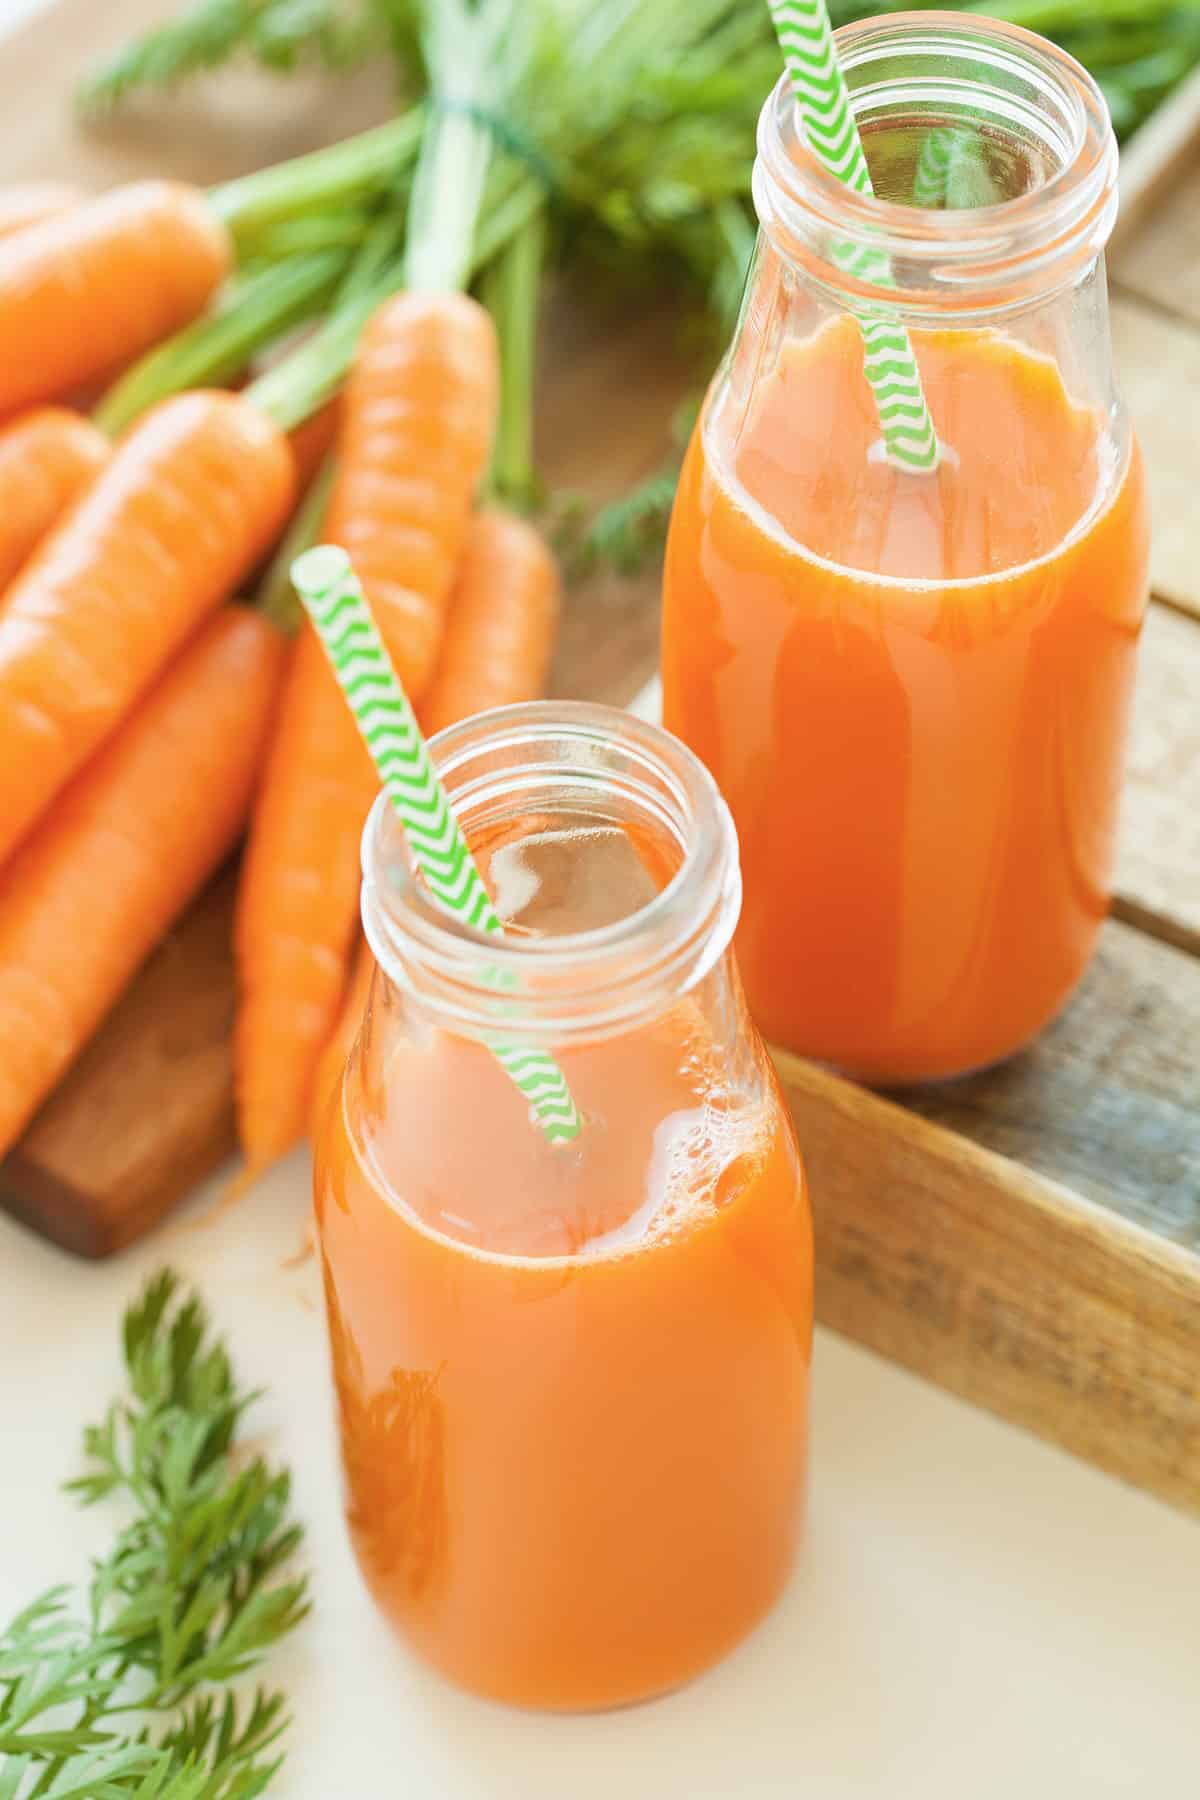 Carrot juice in glass bottles with green striped straws and fresh carrots on background